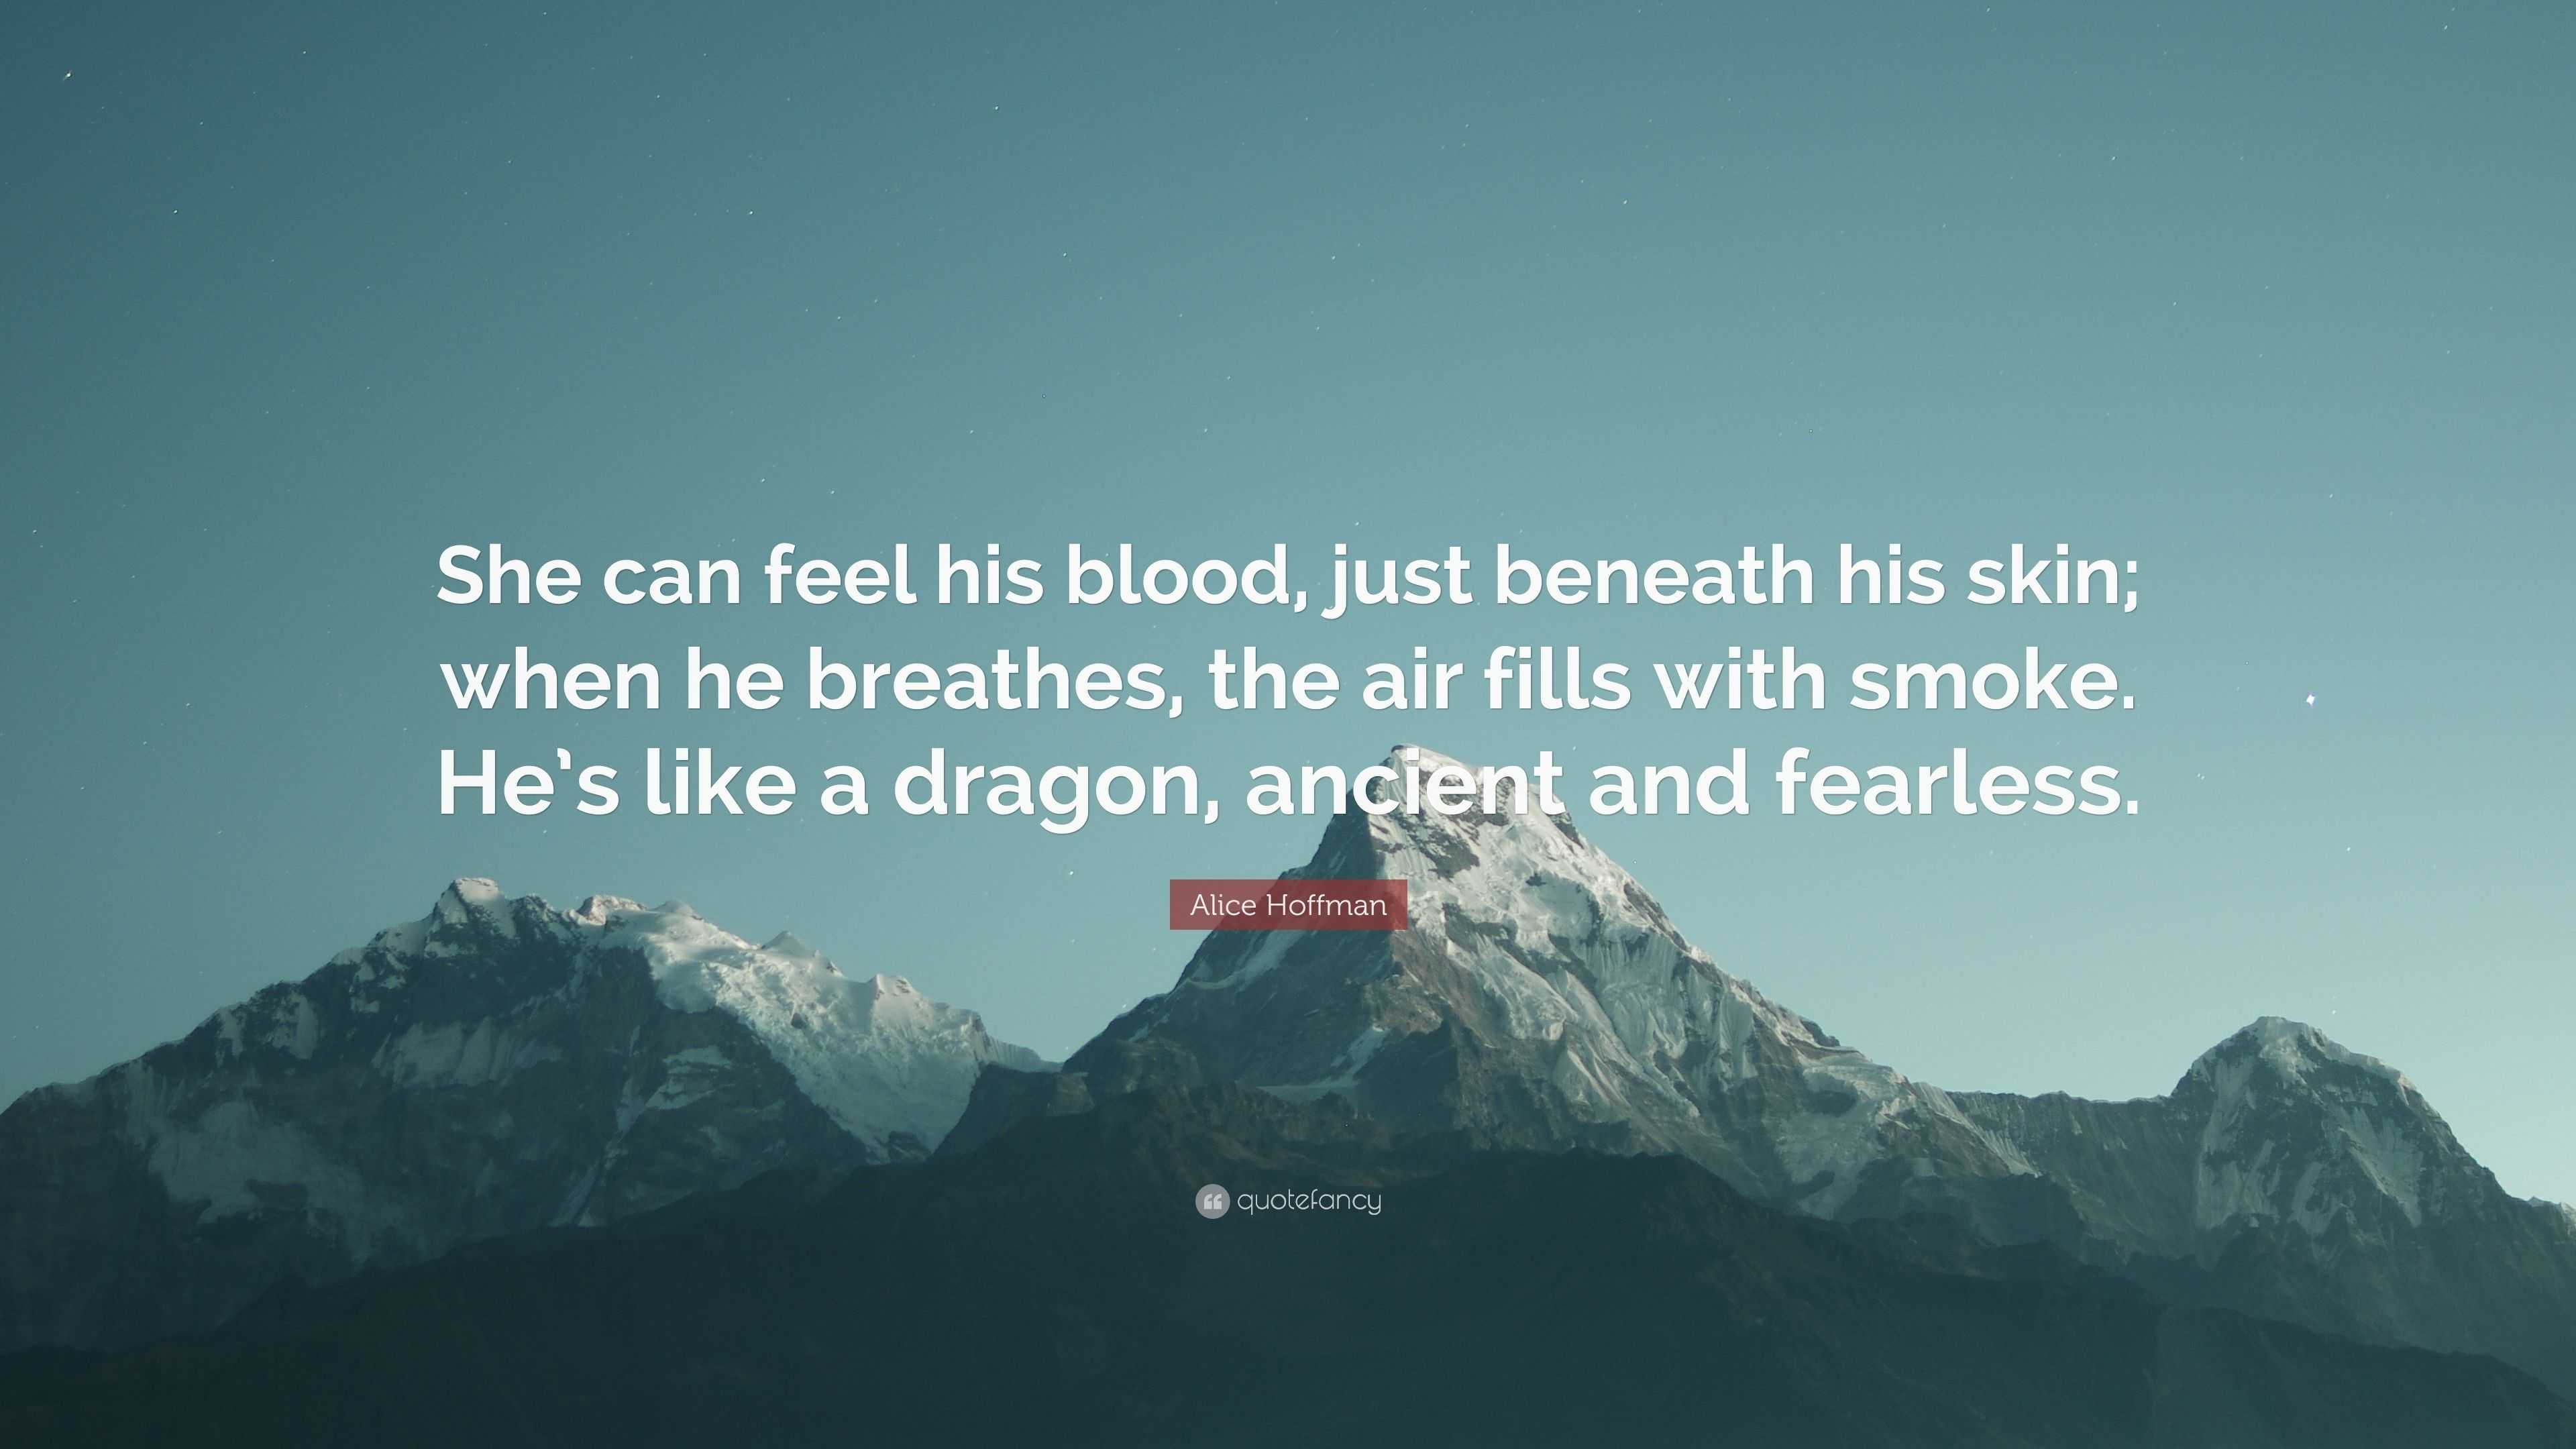 Alice Hoffman Quote: “She can feel his blood, just beneath his skin; when  he breathes, the air fills with smoke. He's like a dragon, ancient a”